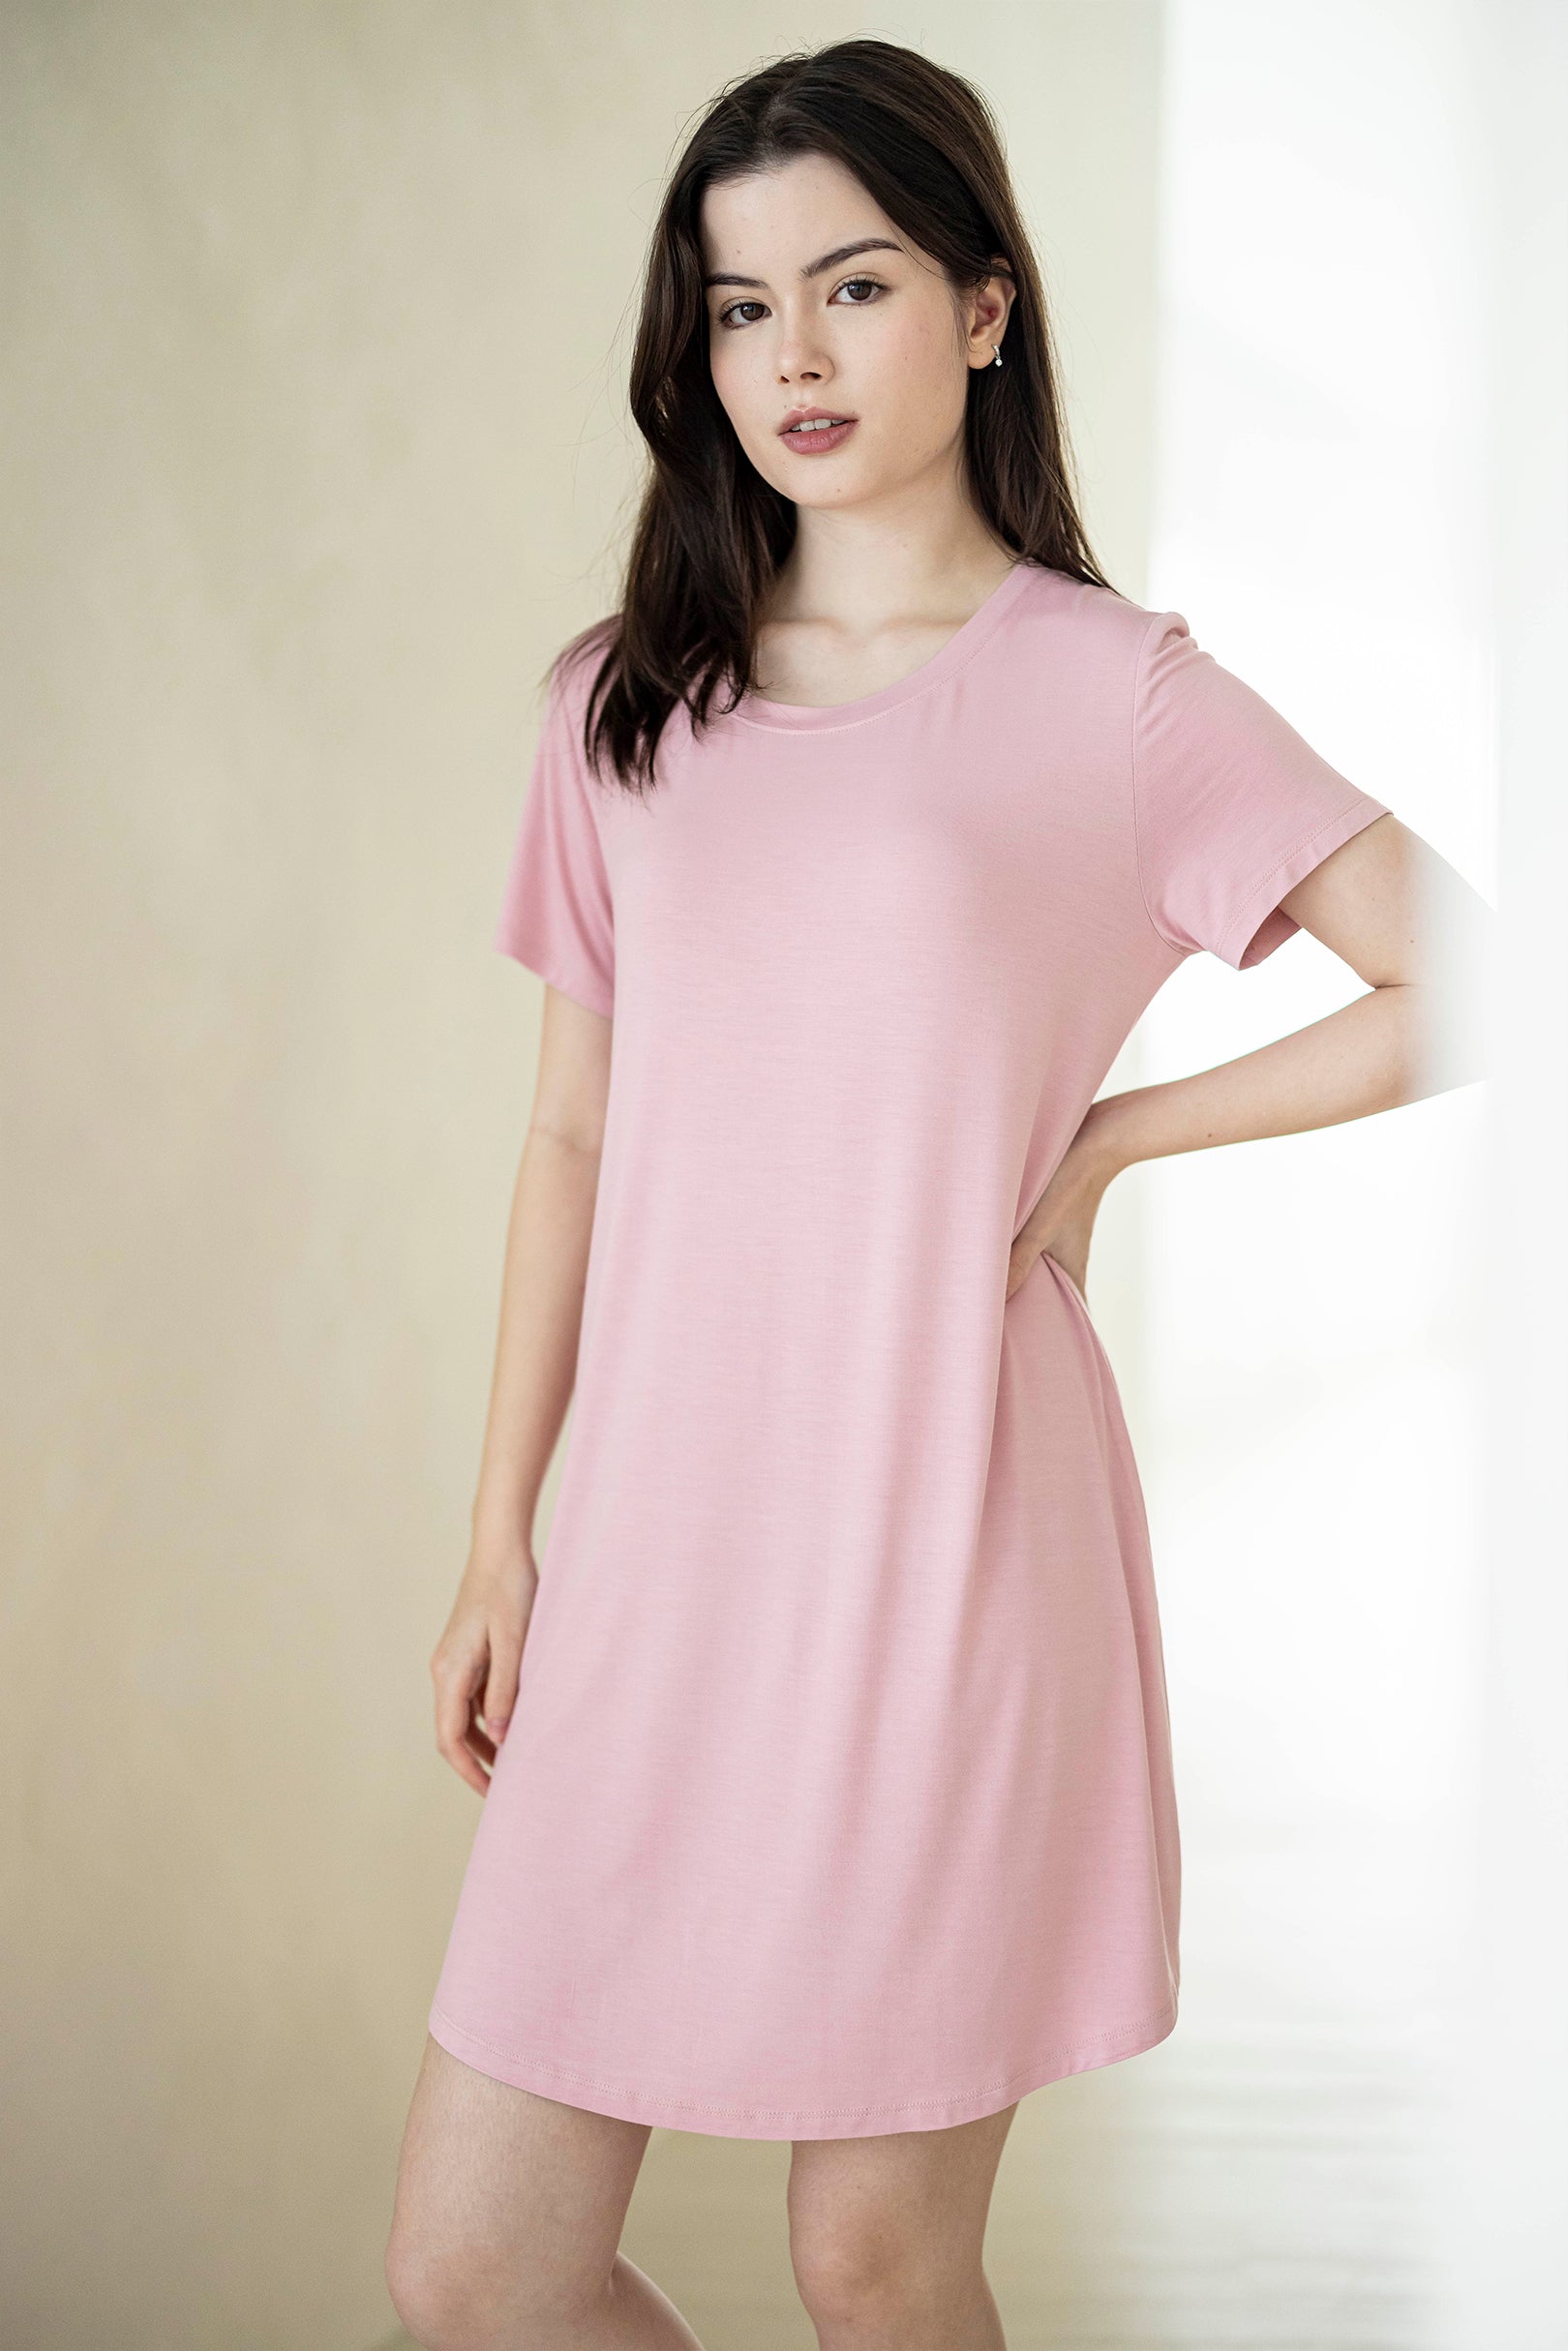 Ice-Cool Lounge Dress in Peony Pink